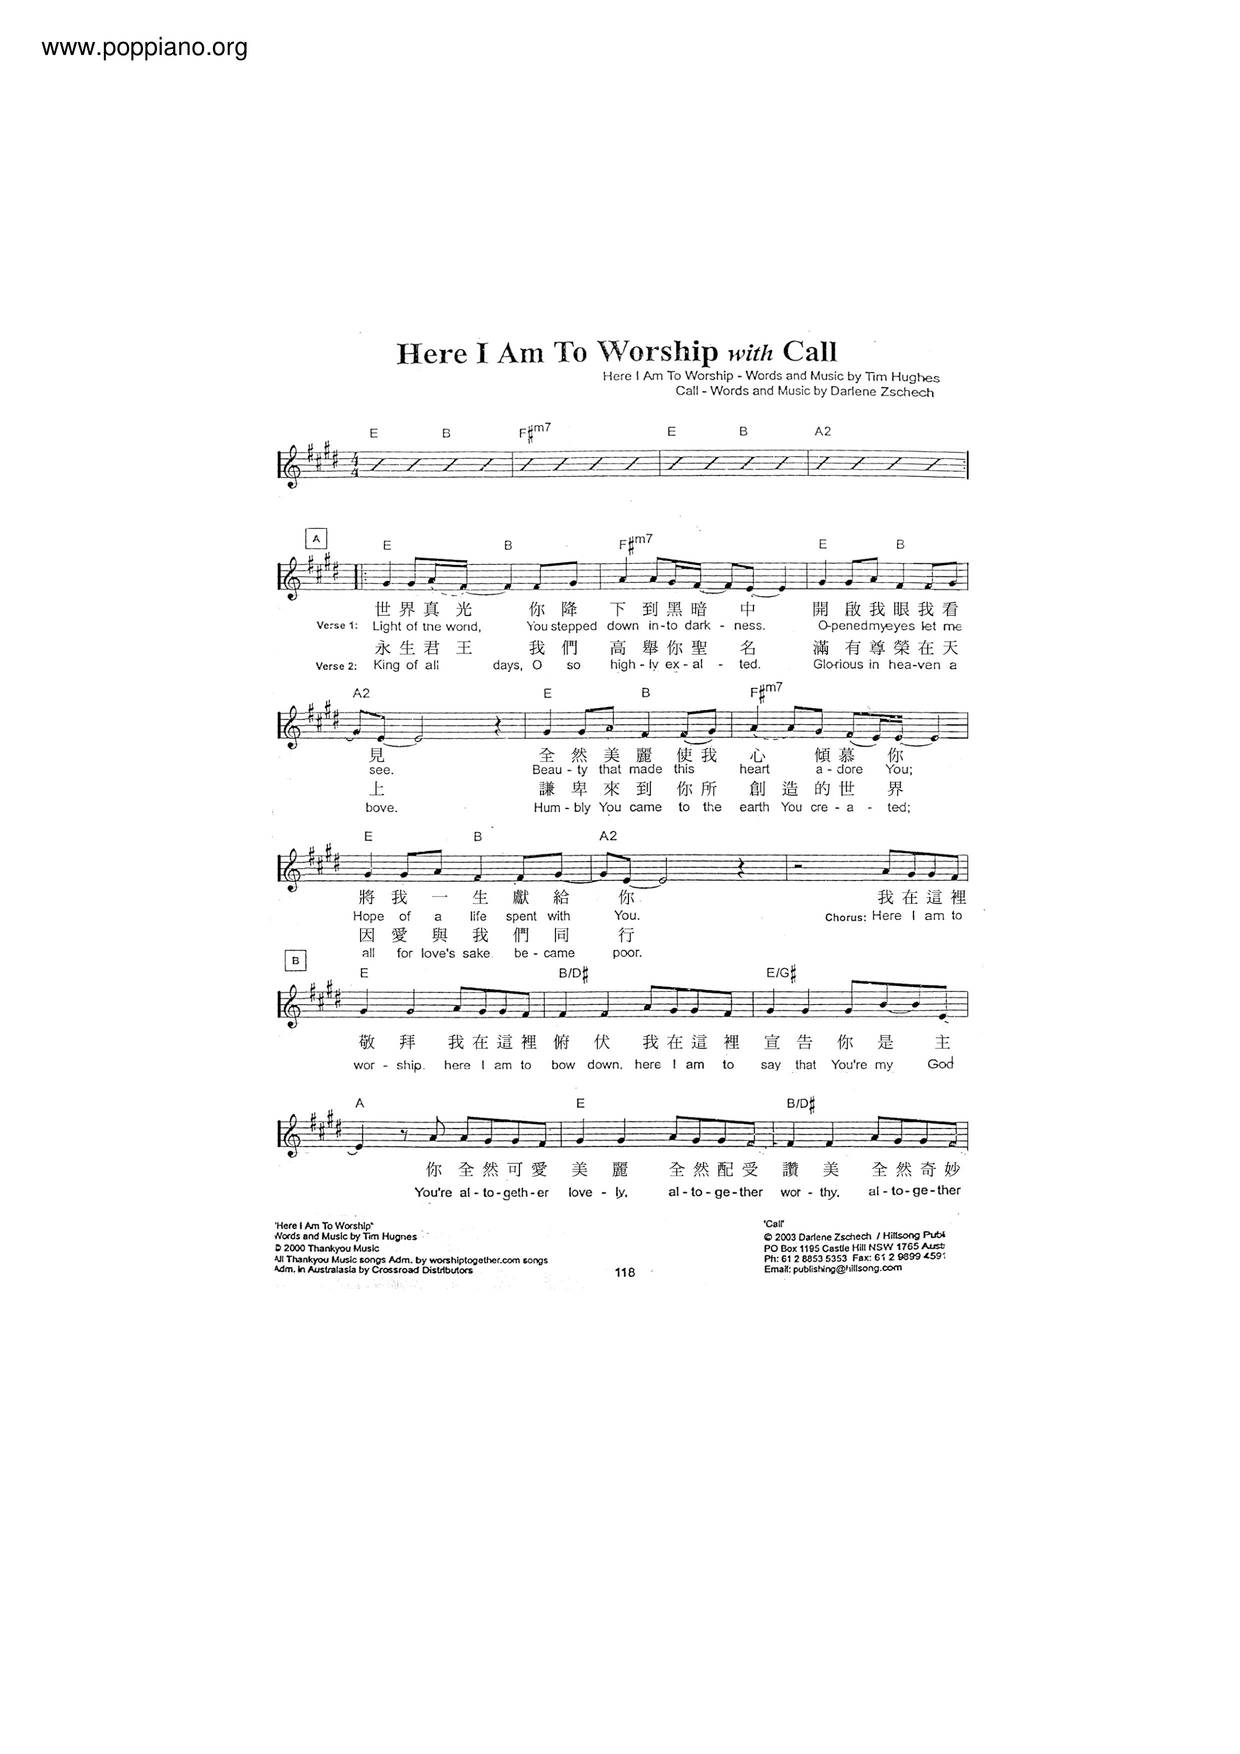 Here I'm To Worship With Call Score